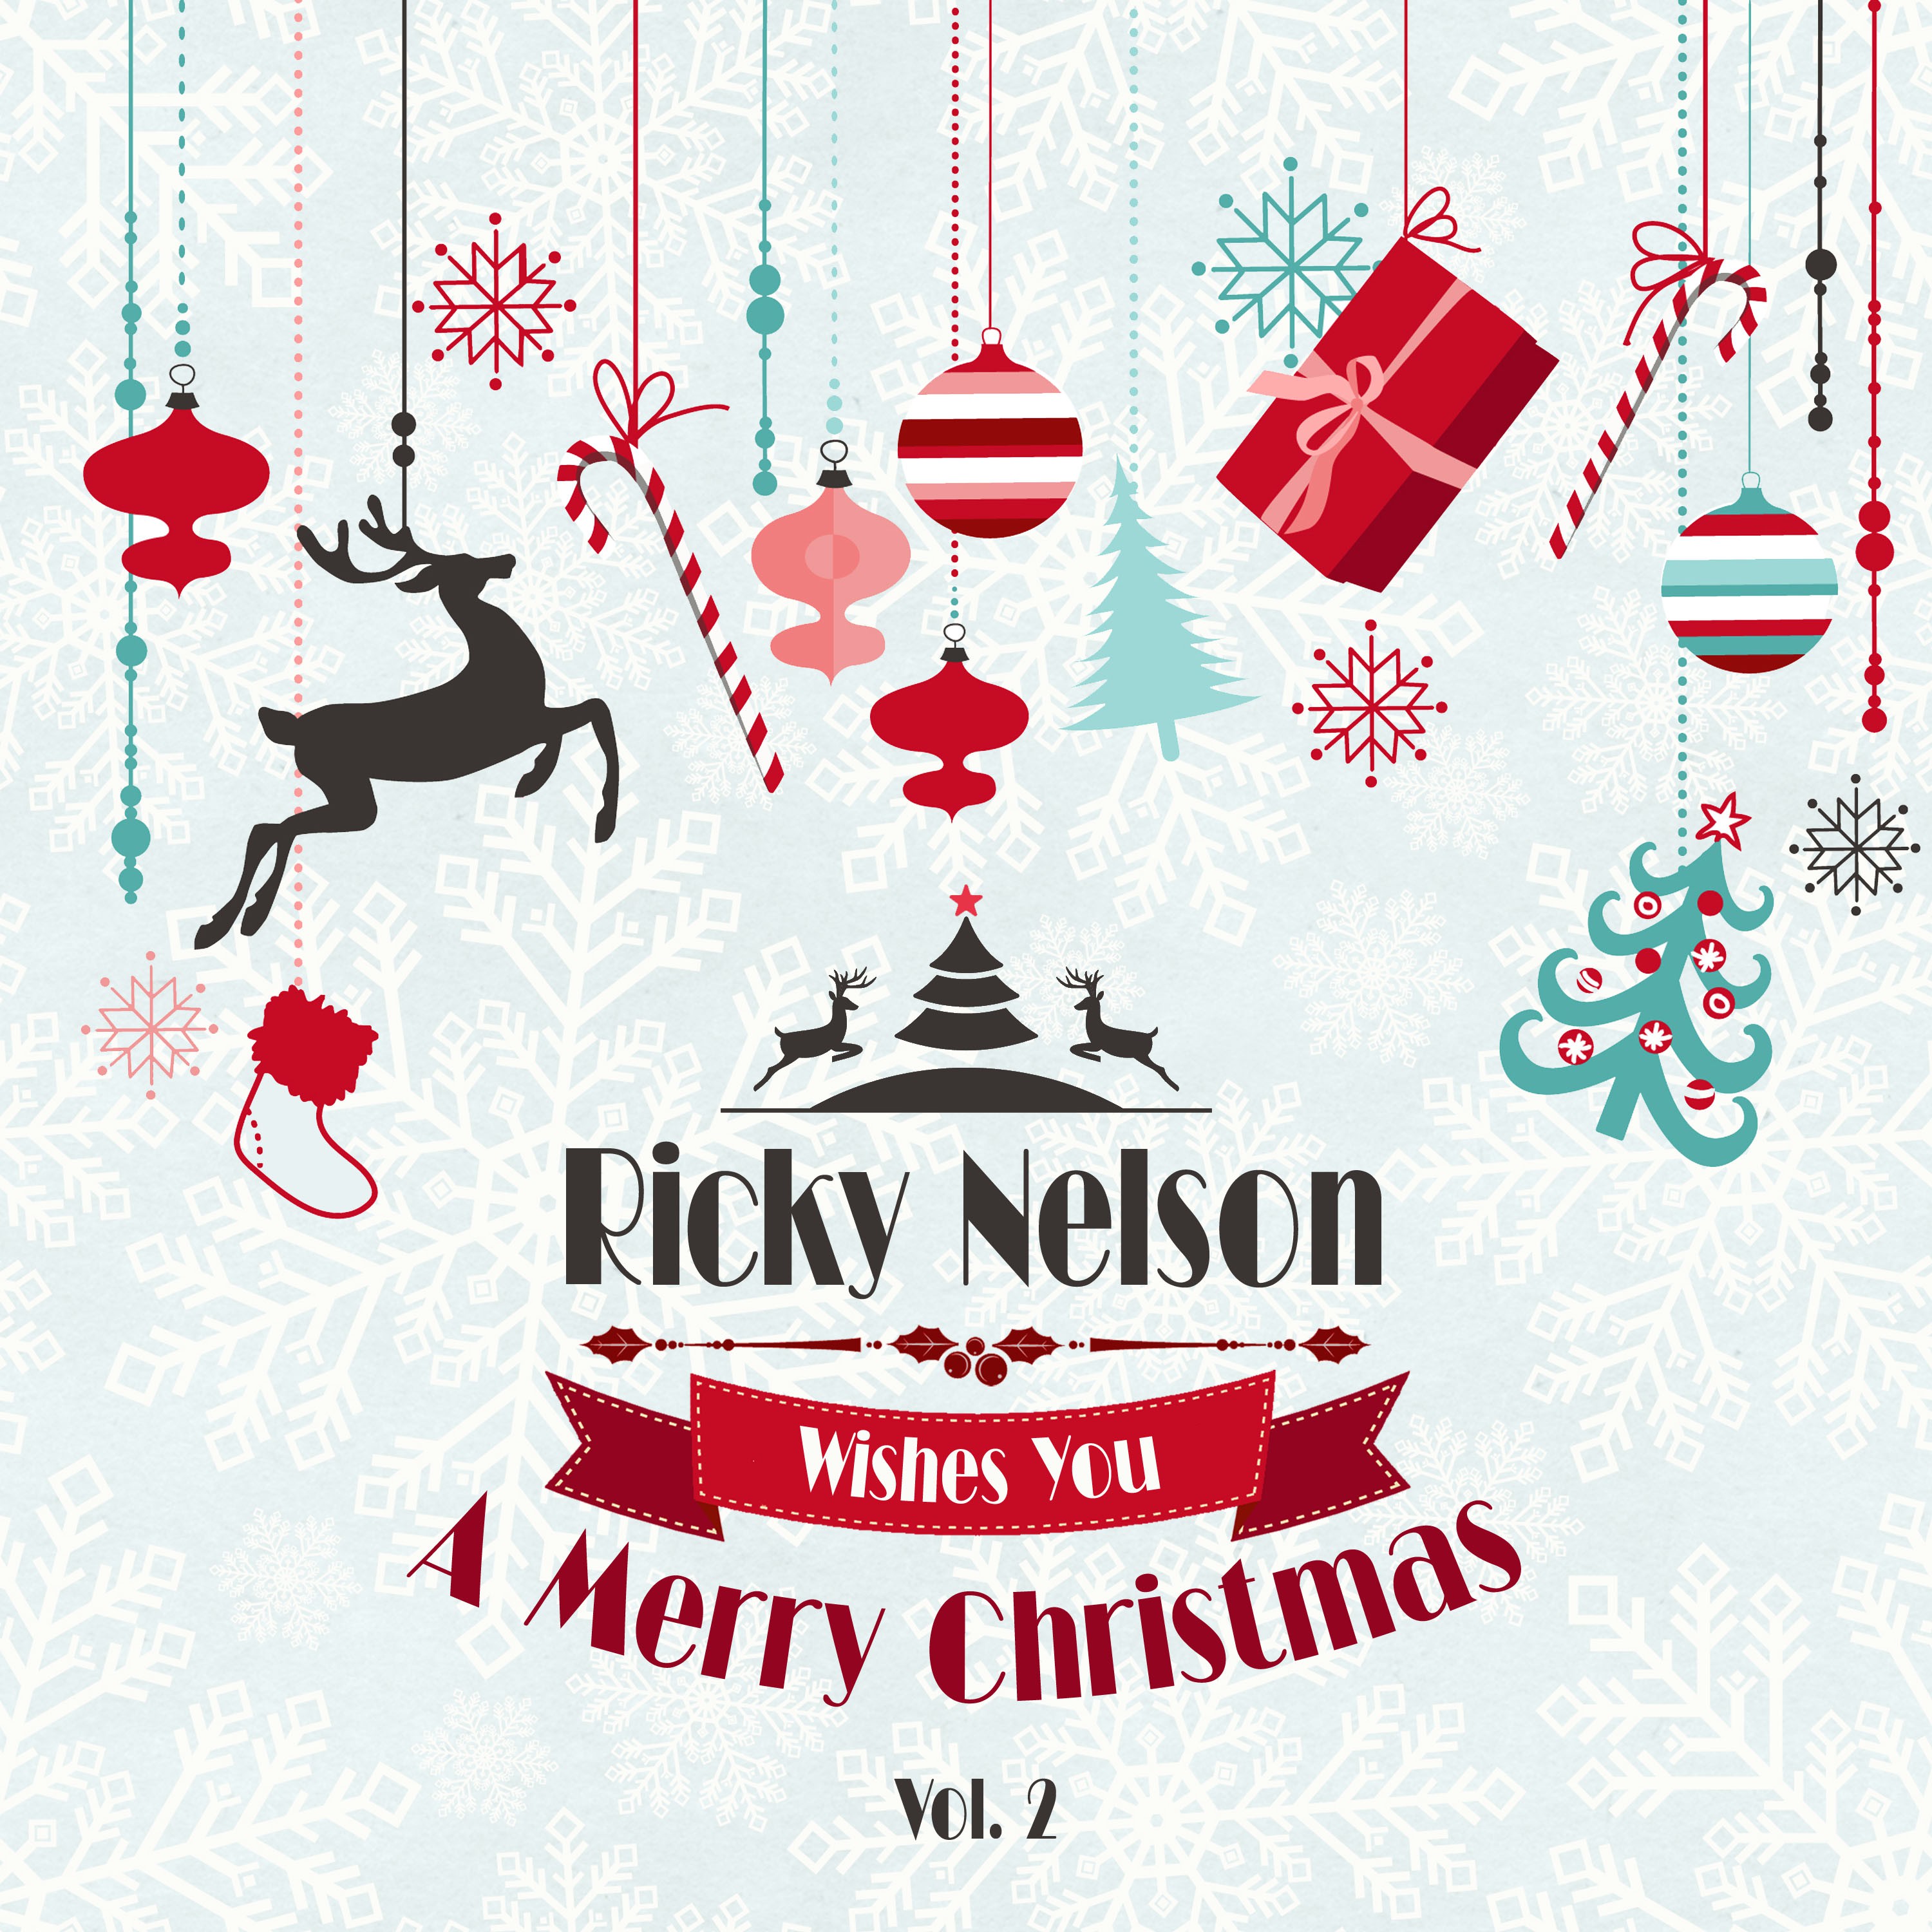 Ricky Nelson Wishes You a Merry Christmas, Vol. 2